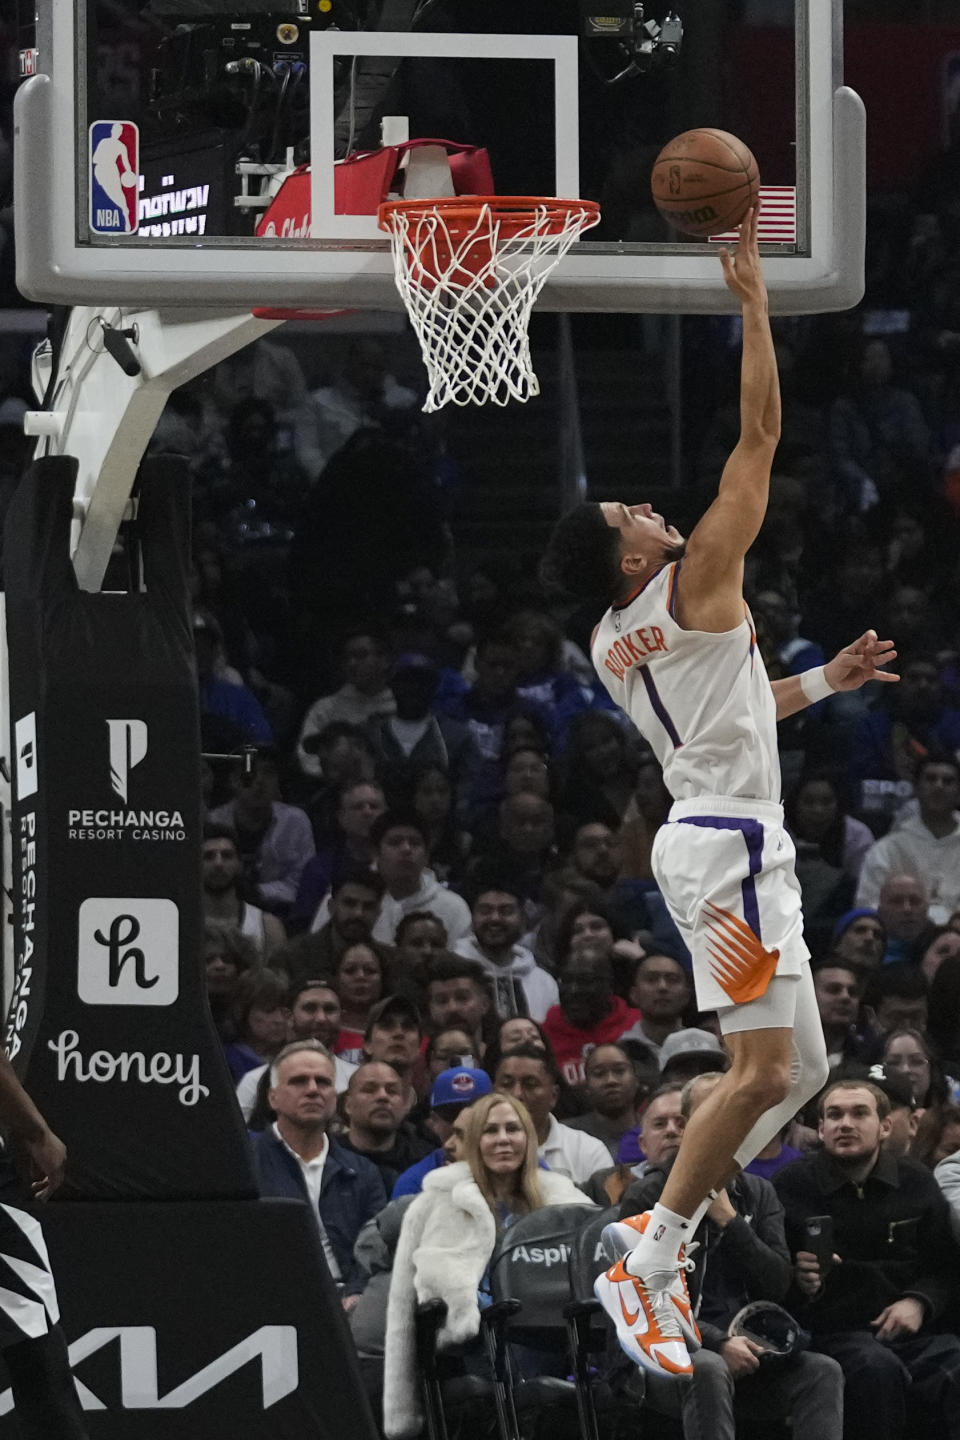 Phoenix Suns guard Devin Booker (1) shoots during the first half of an NBA basketball game against the LA Clippers in Los Angeles, Thursday, Dec. 15, 2022. (AP Photo/Ashley Landis)